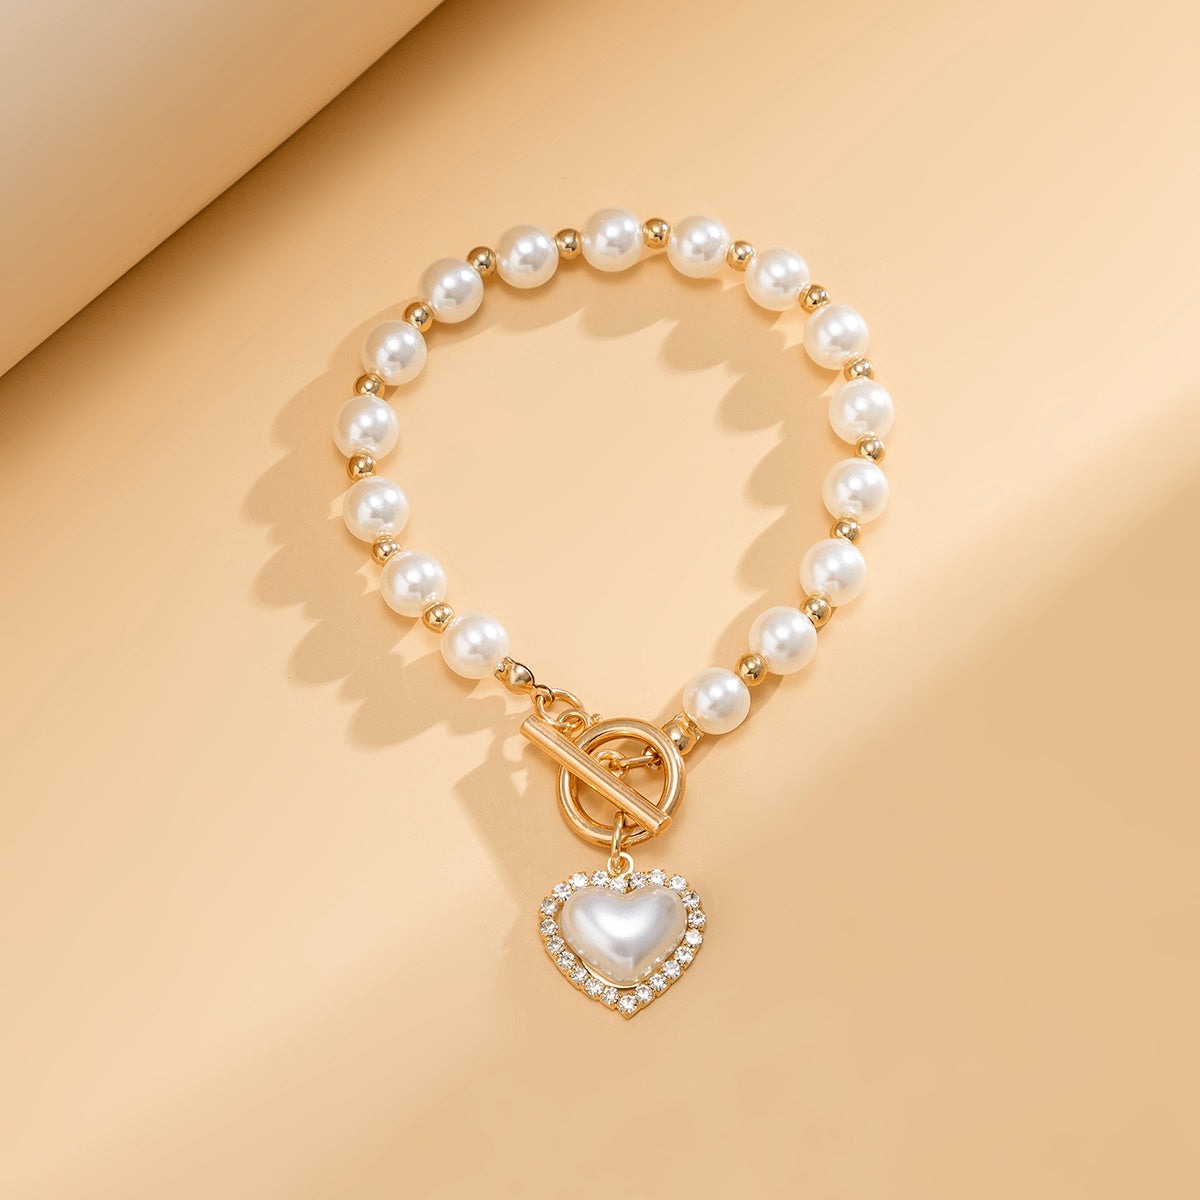 Elegant Heart-Shaped Beaded Bracelet with Faux Pearls and OT Buckle - Perfect Hand Jewelry Decor